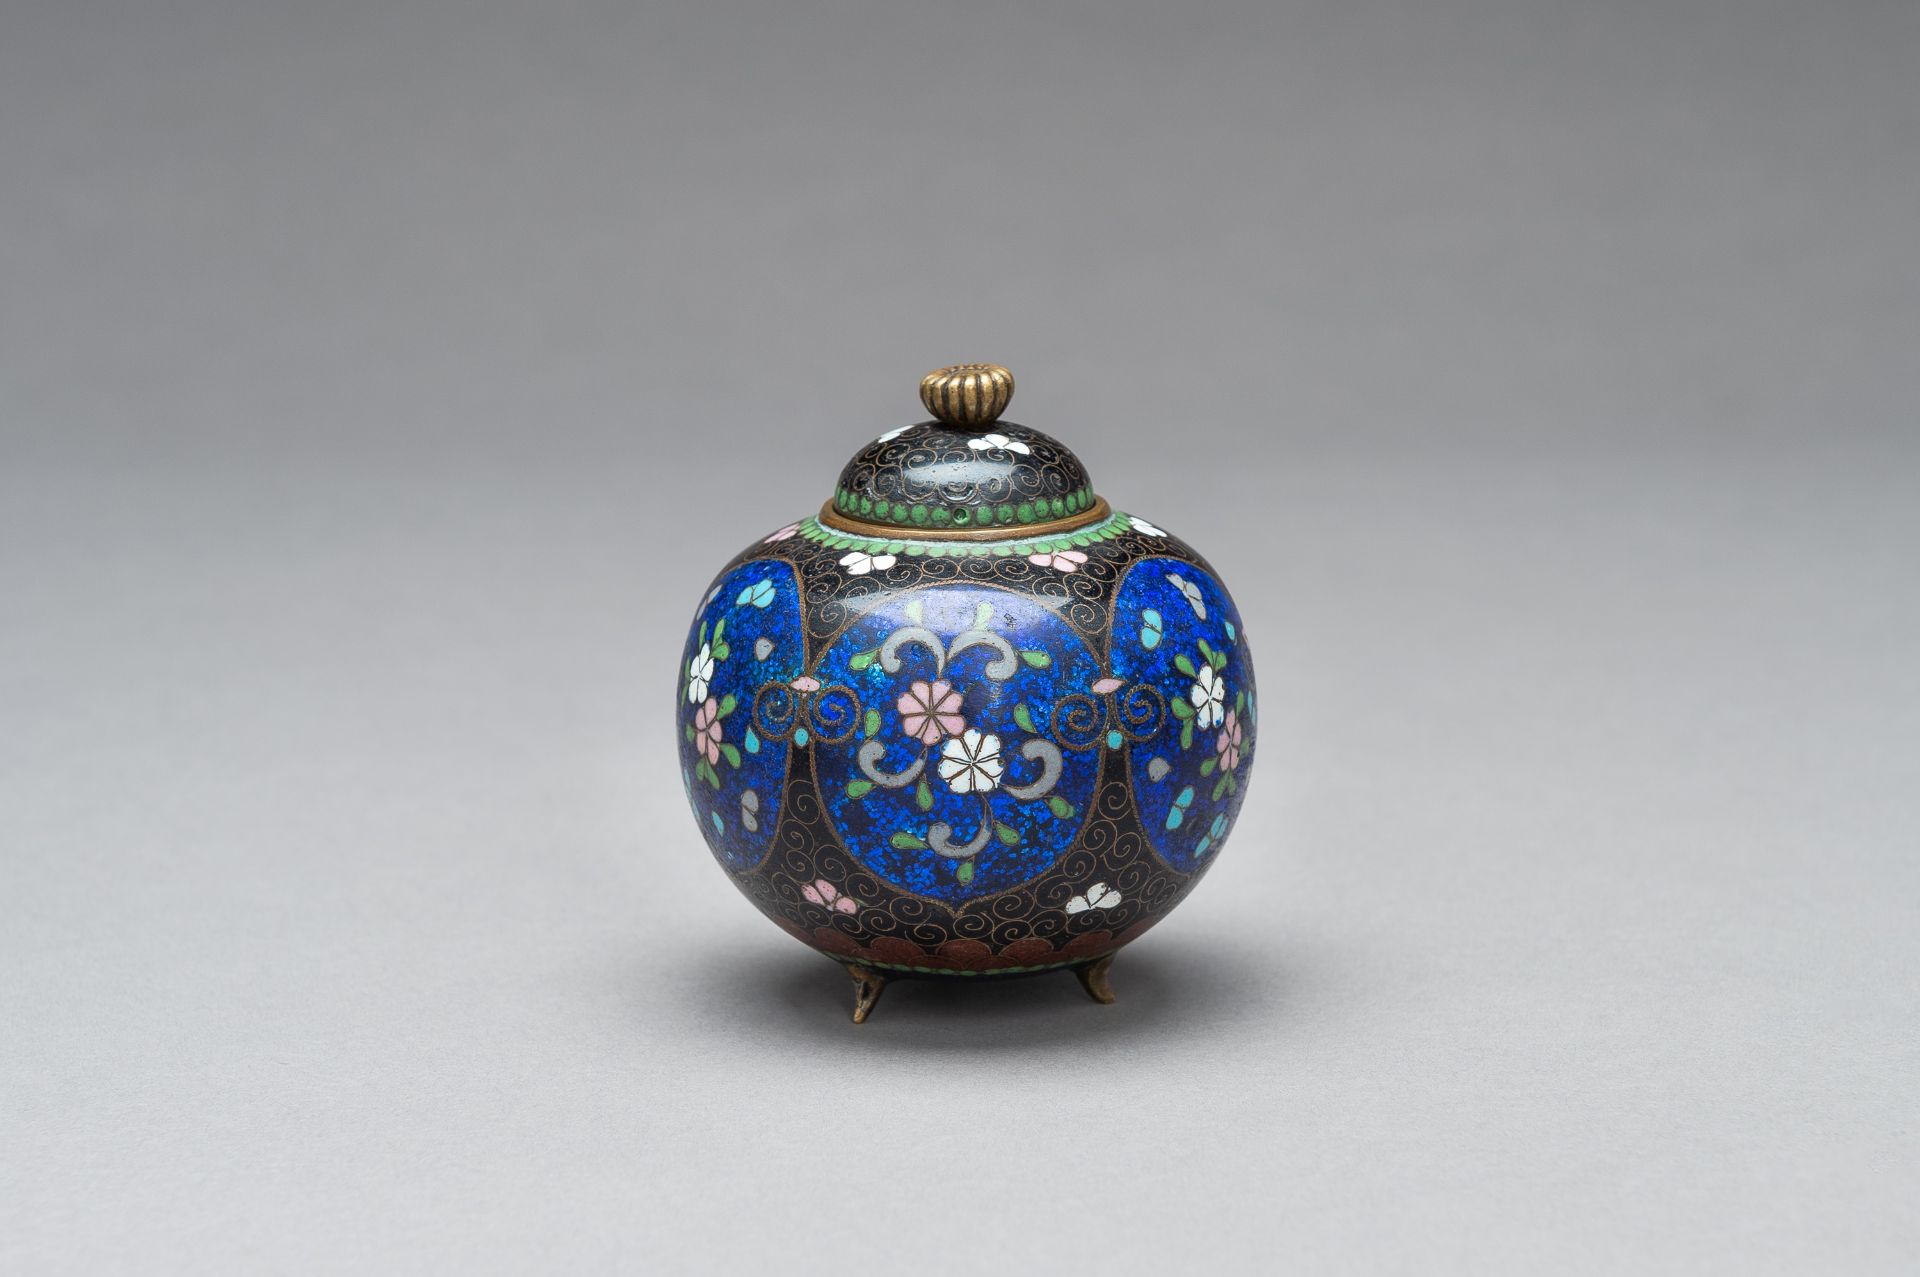 A CLOISONNE KORO WITH COVER